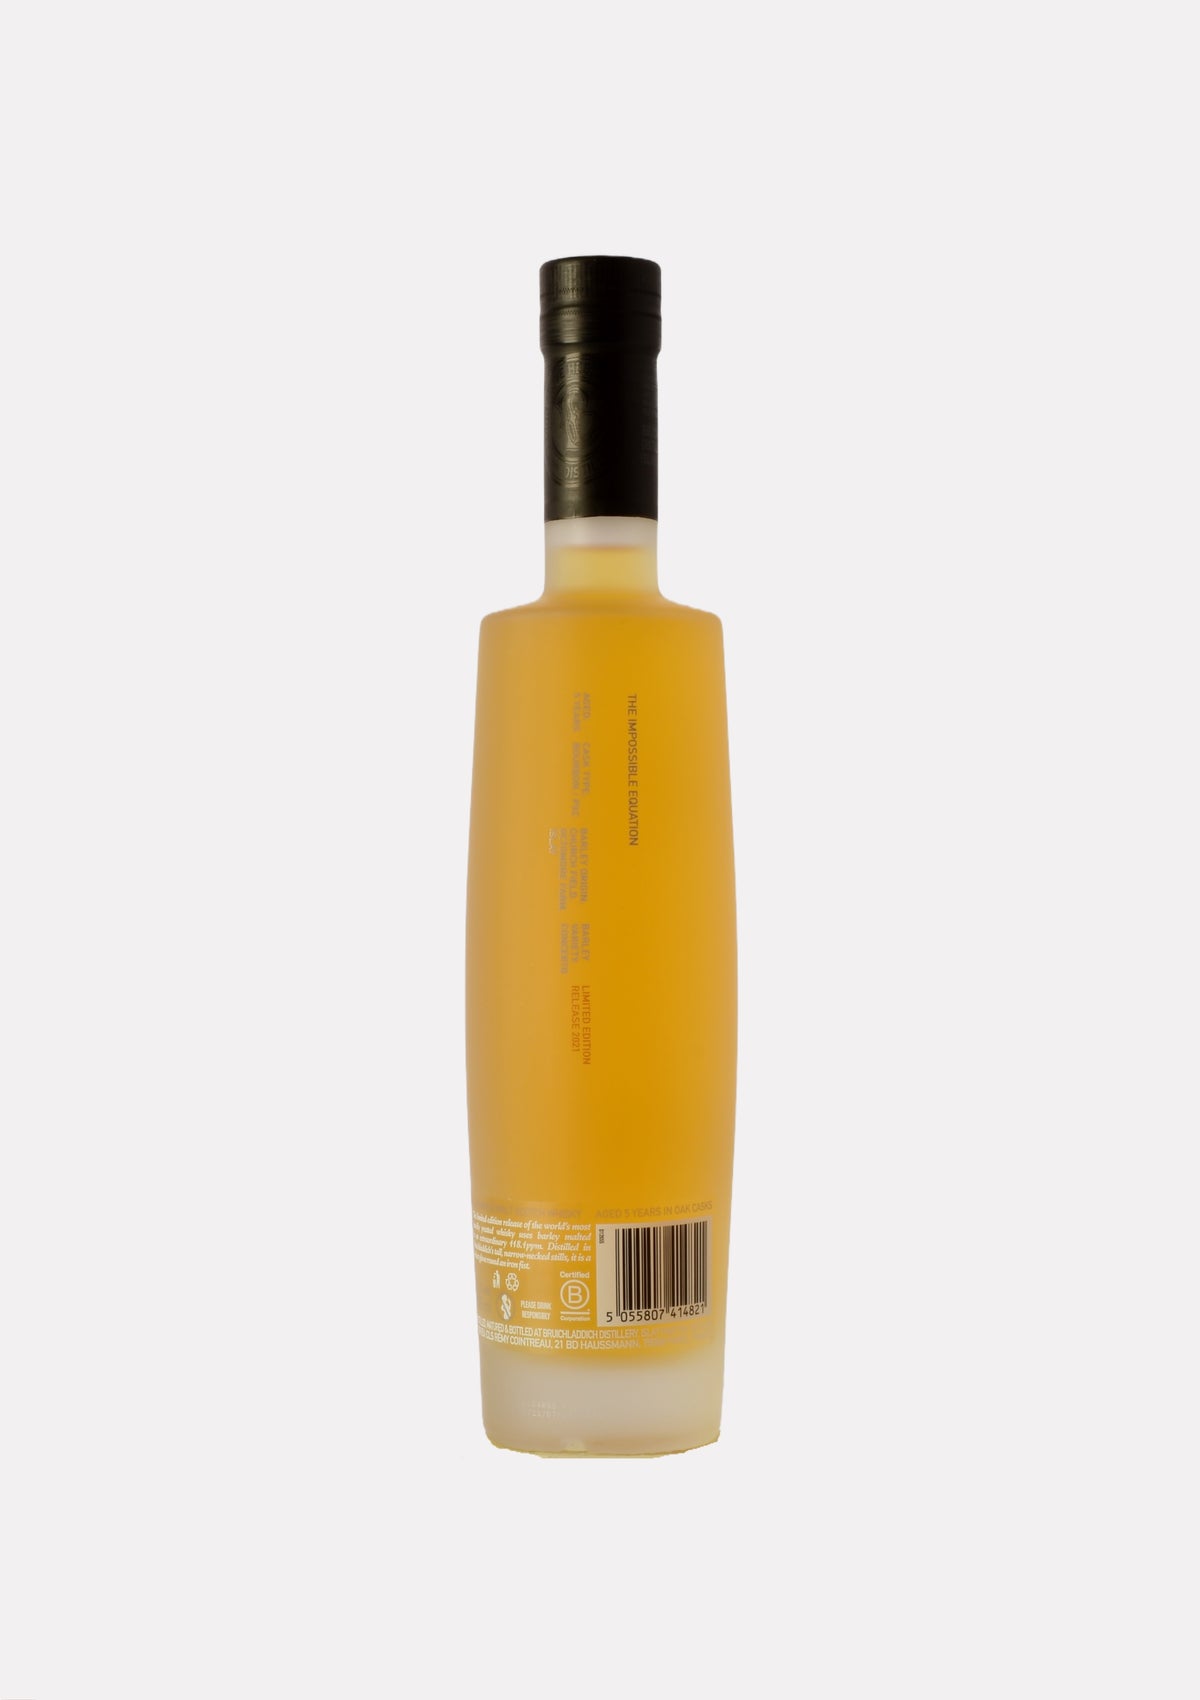 Octomore 12.3 118.1 ppm